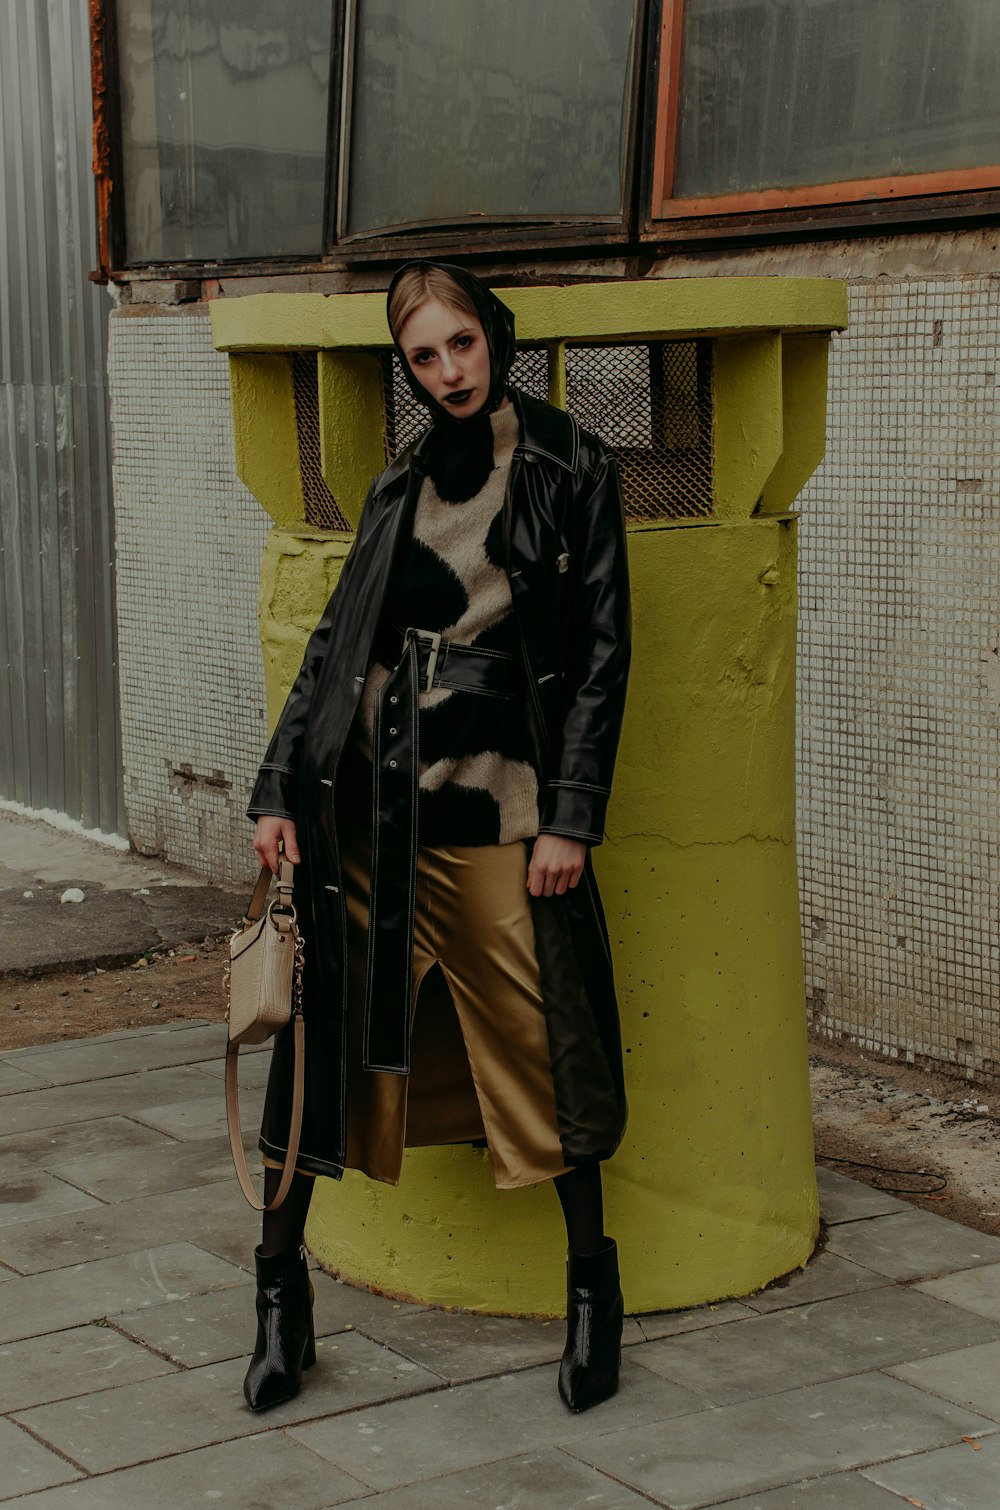 woman in black coat and gray pants standing beside yellow concrete wall